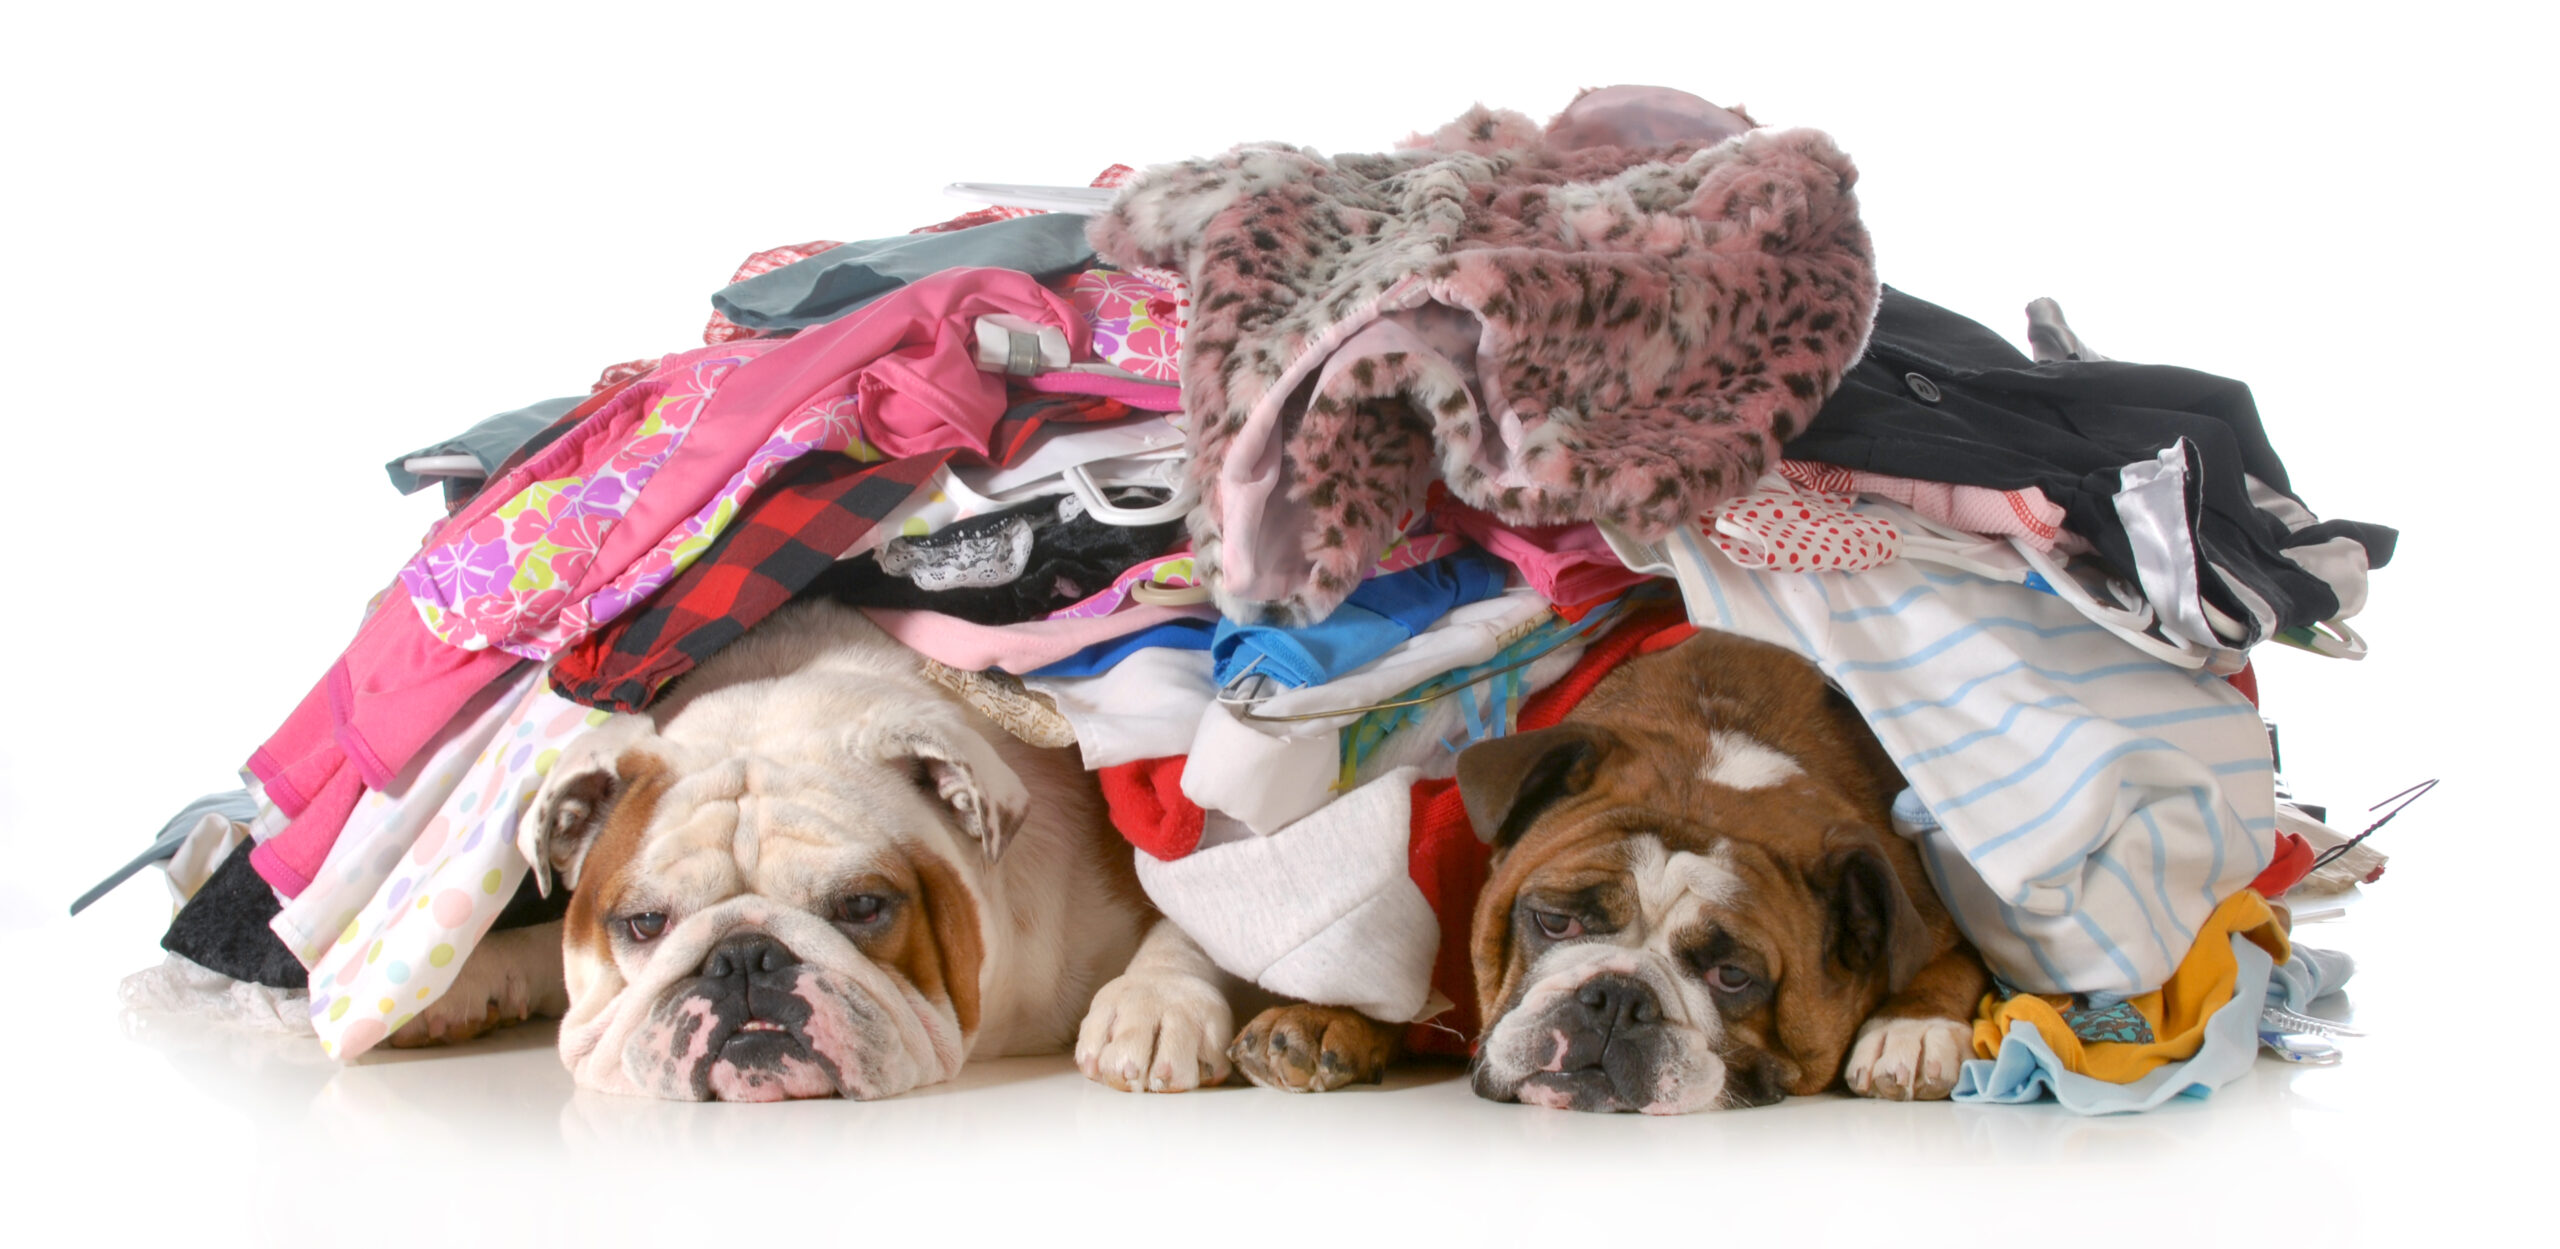 Bad news: Bed bugs like the smell of your dirty laundry